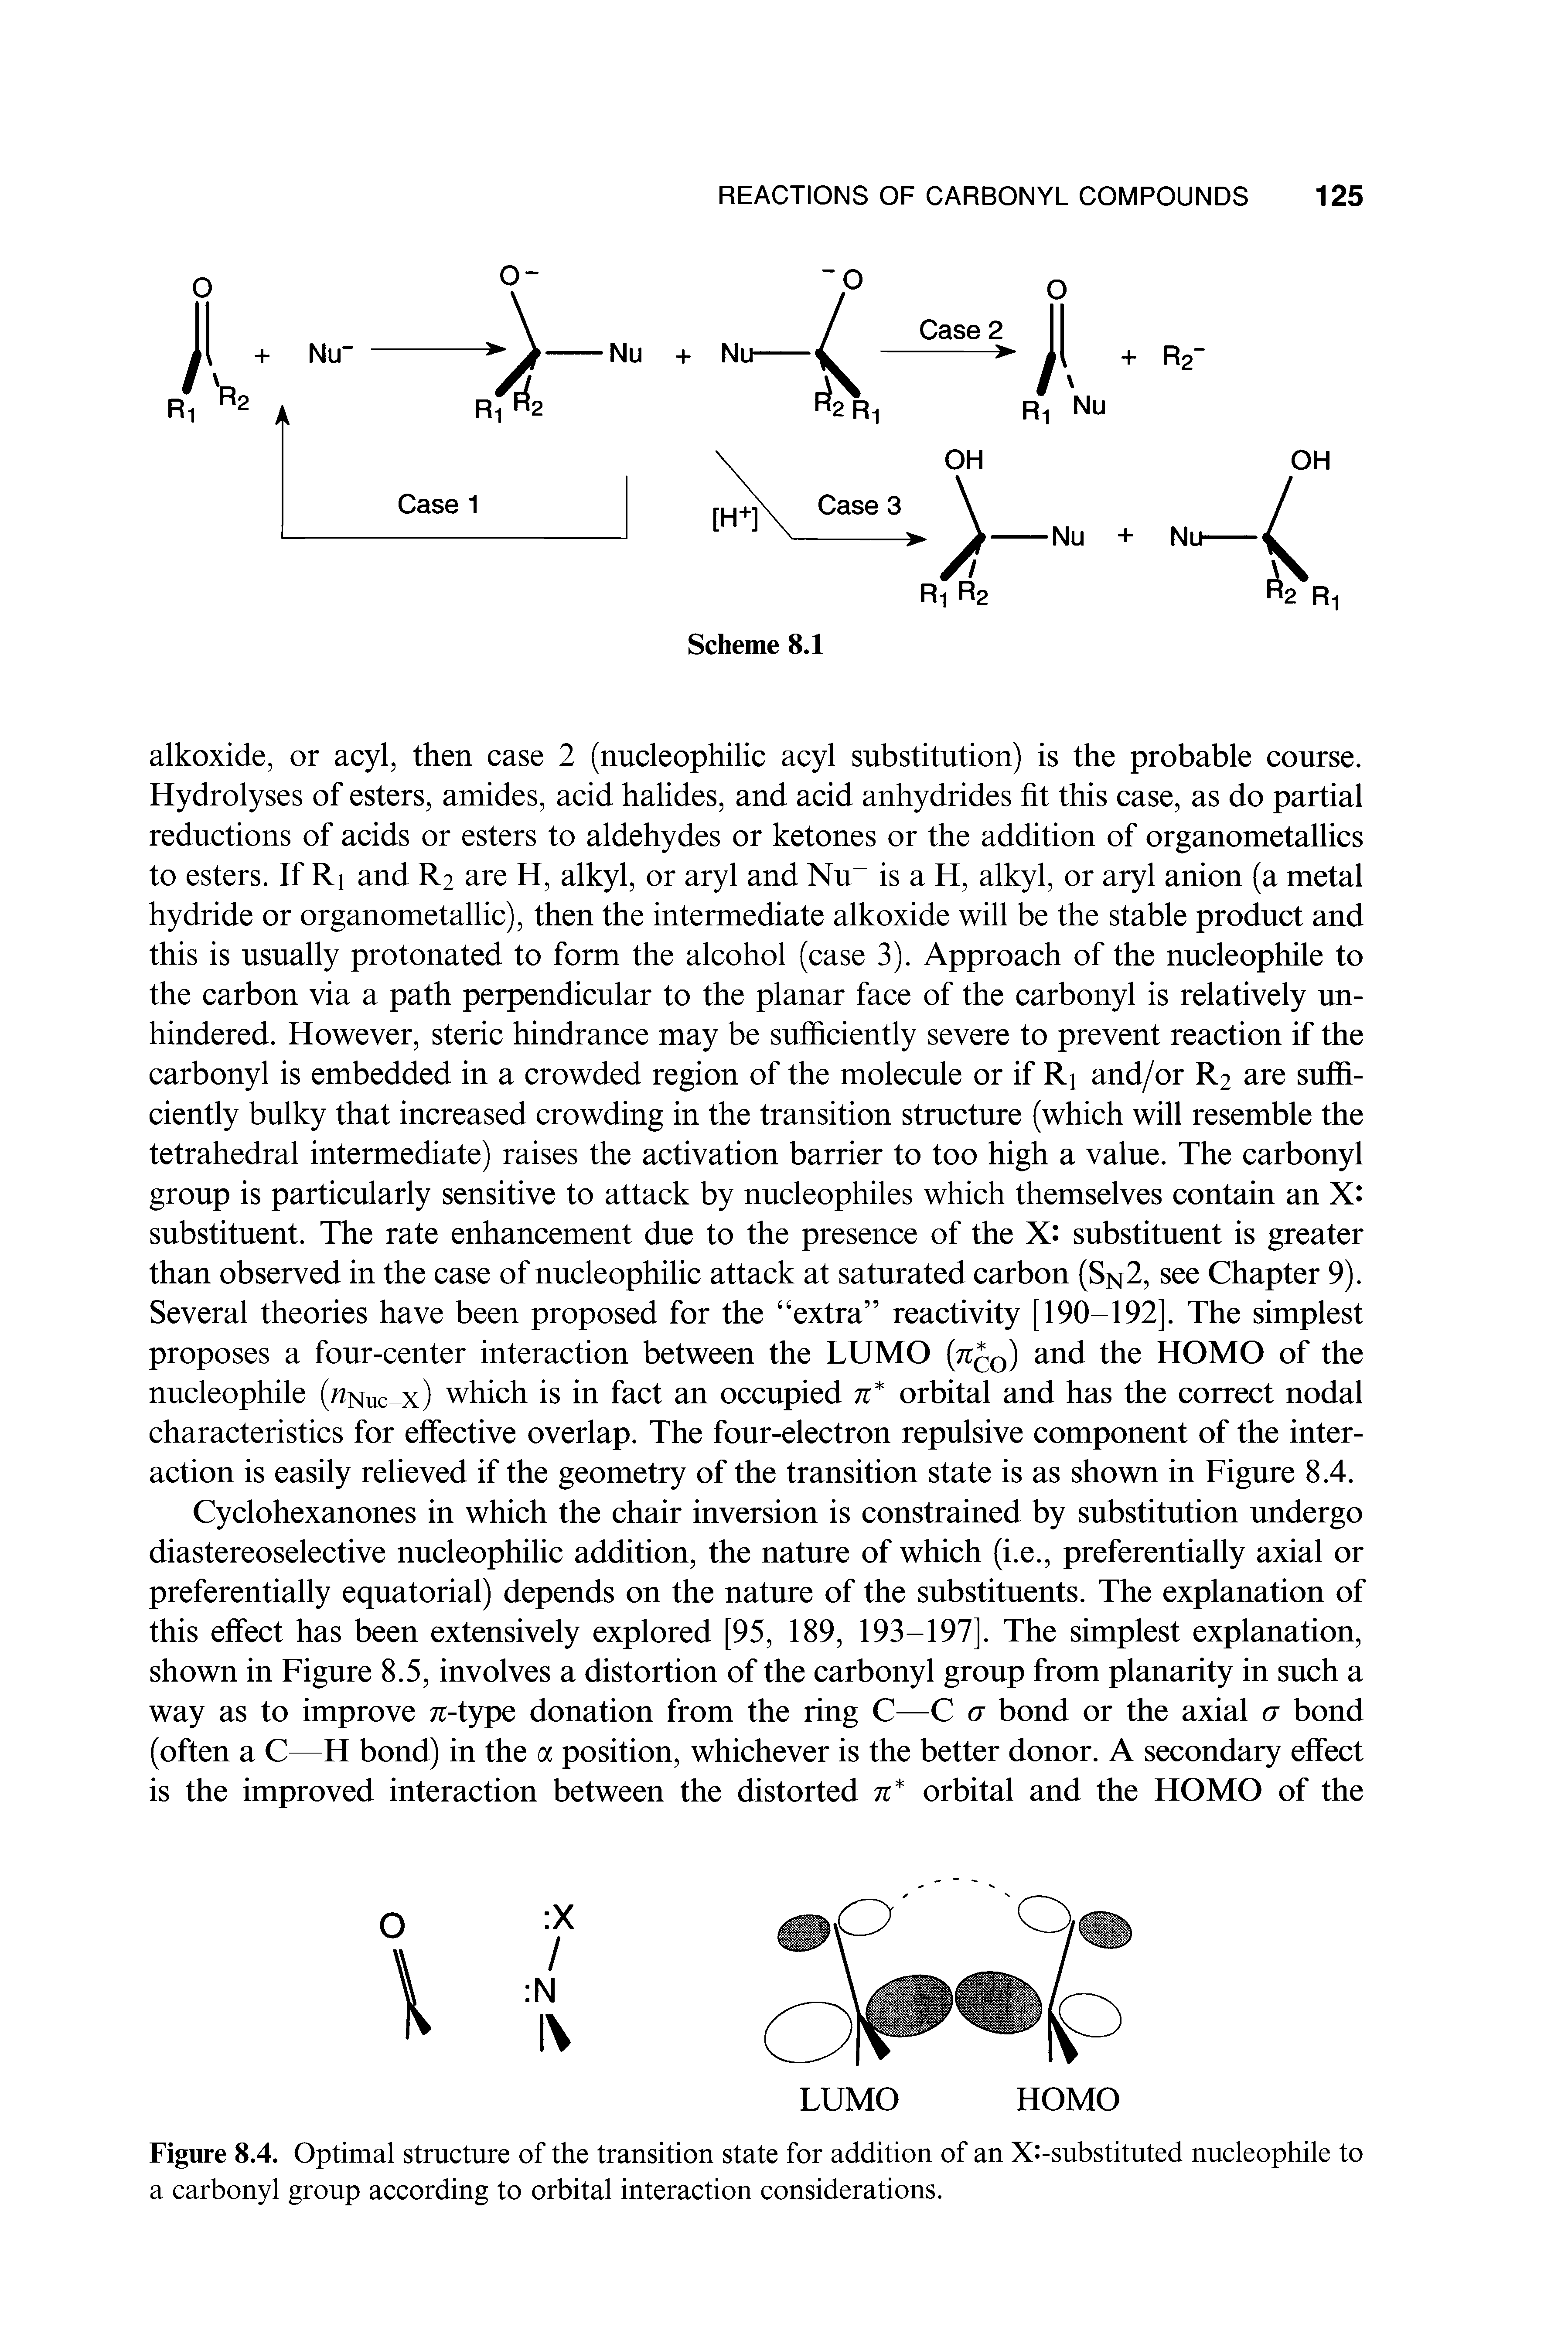 Figure 8.4. Optimal structure of the transition state for addition of an X -substituted nucleophile to a carbonyl group according to orbital interaction considerations.